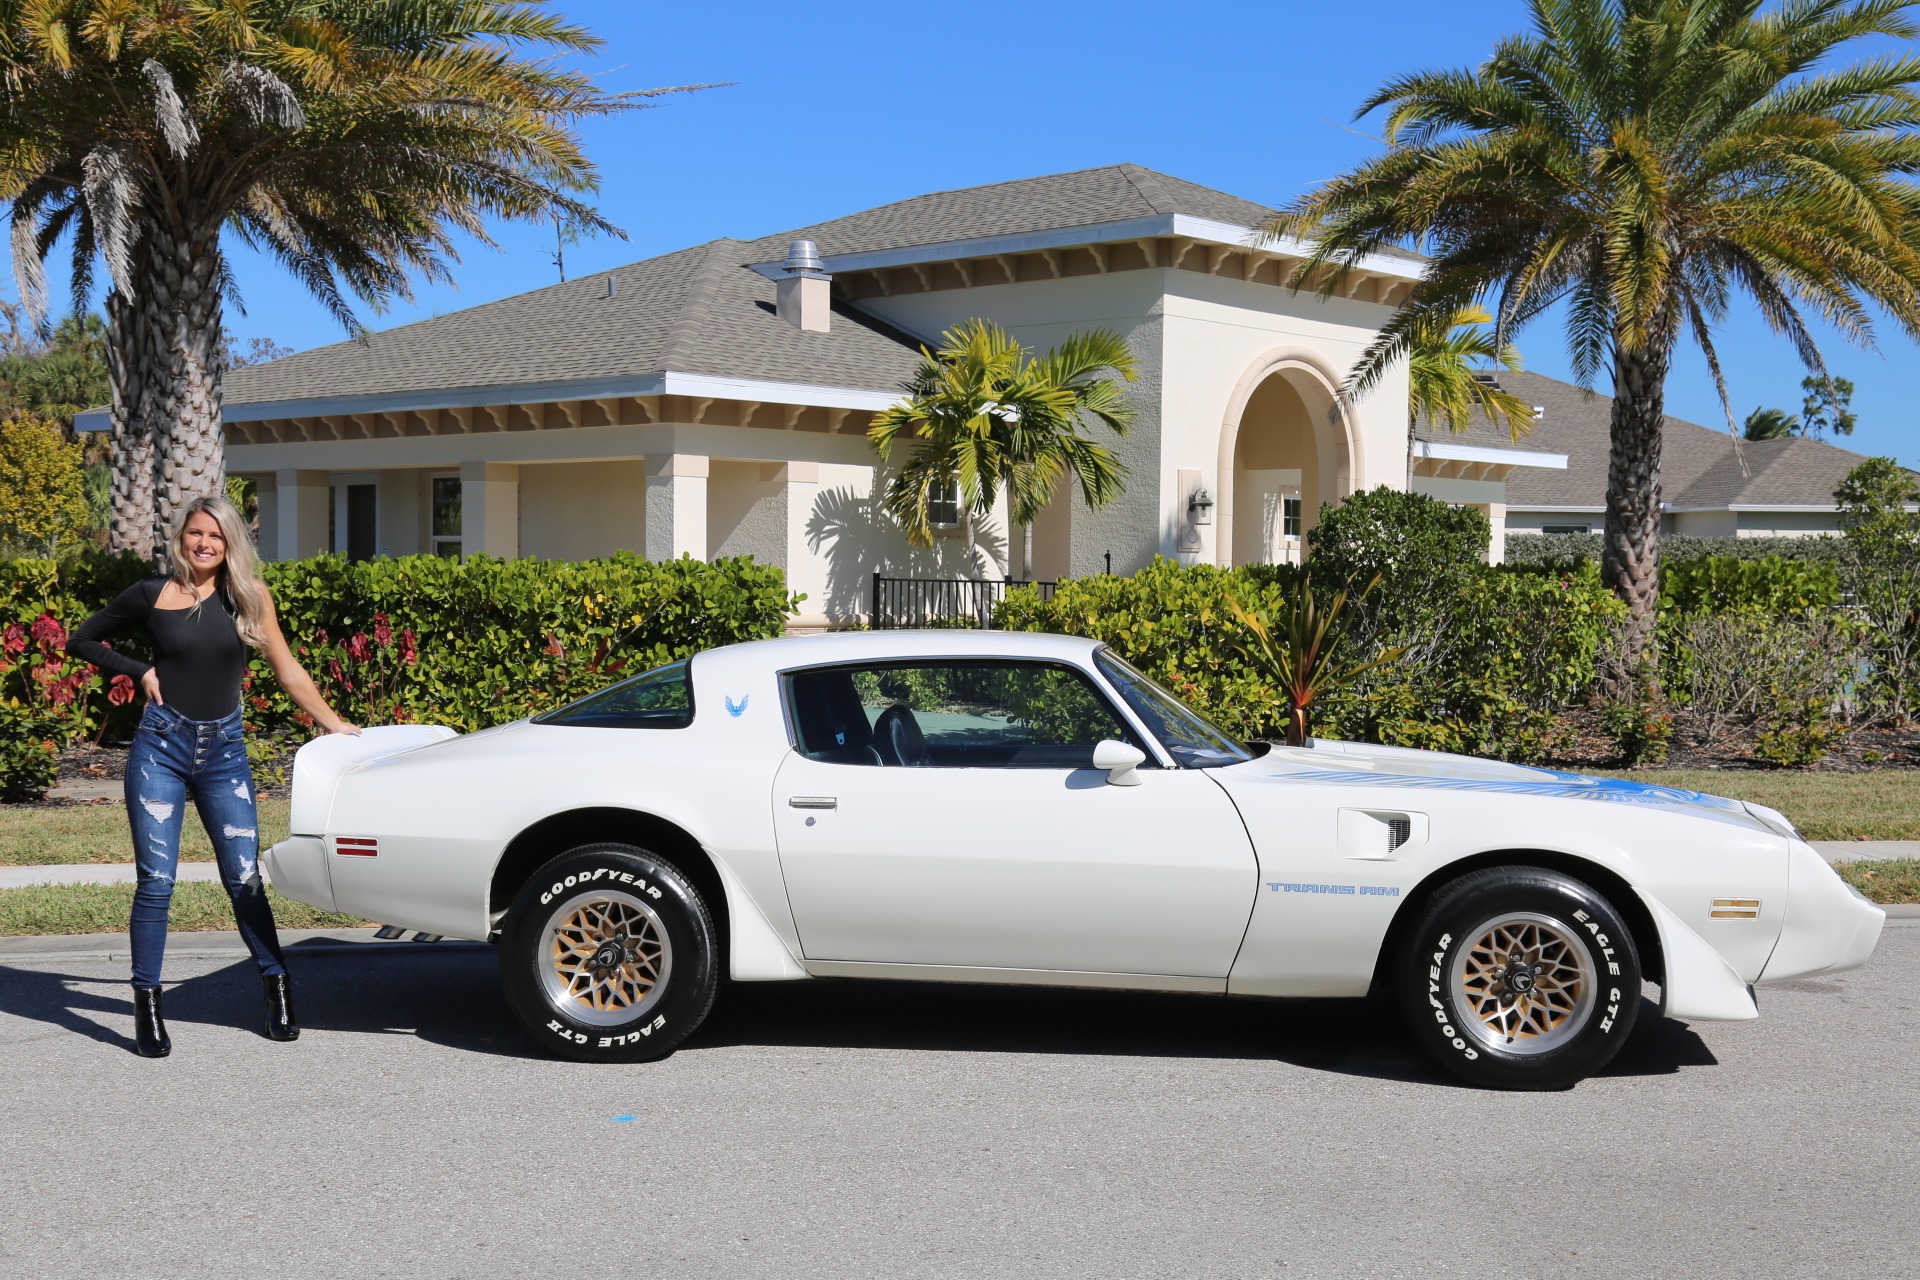 Used 1980 Pontiac Ttrans Am Trans Am for sale Sold at Muscle Cars for Sale Inc. in Fort Myers FL 33912 4